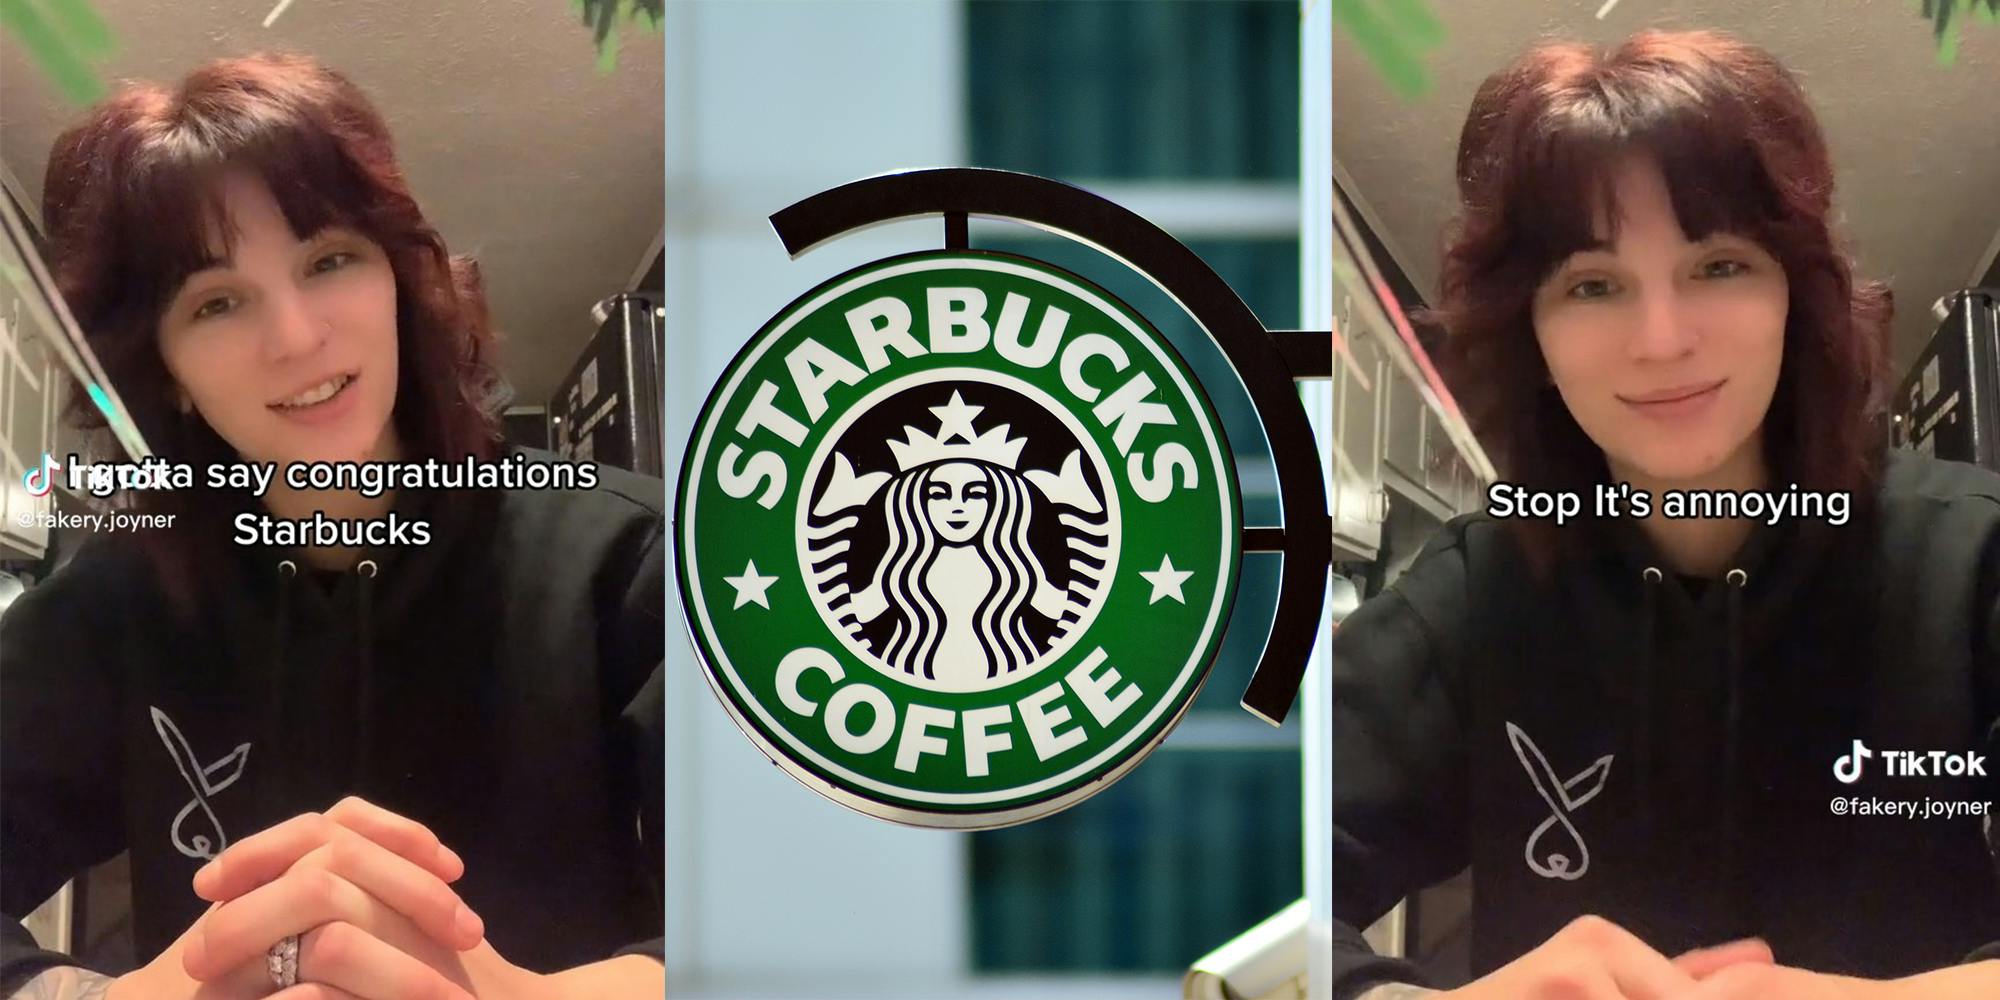 Customer slams Starbucks for Life, says she couldn't win anything after playing 5 times a day